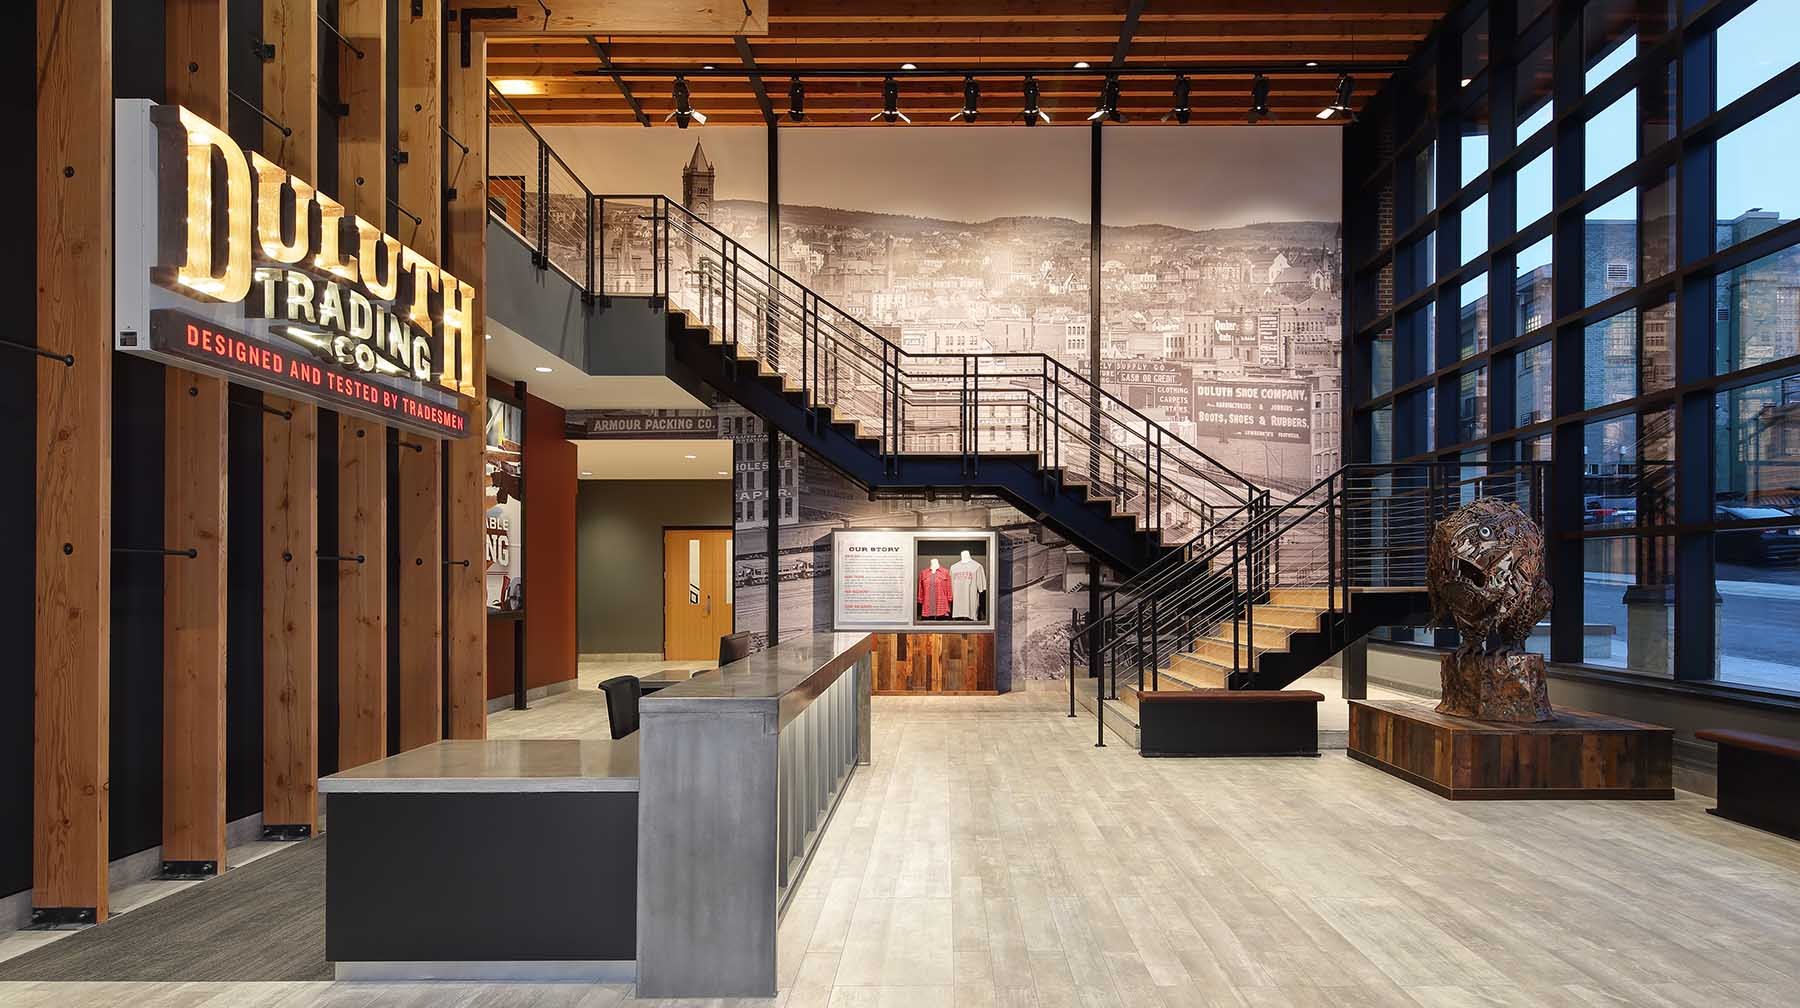 The Duluth Trading Company Headquarters in Mount Horeb, WI illustrates incorporates artwork and a sophisticated selection of materials and finishes to evoke the Duluth brand